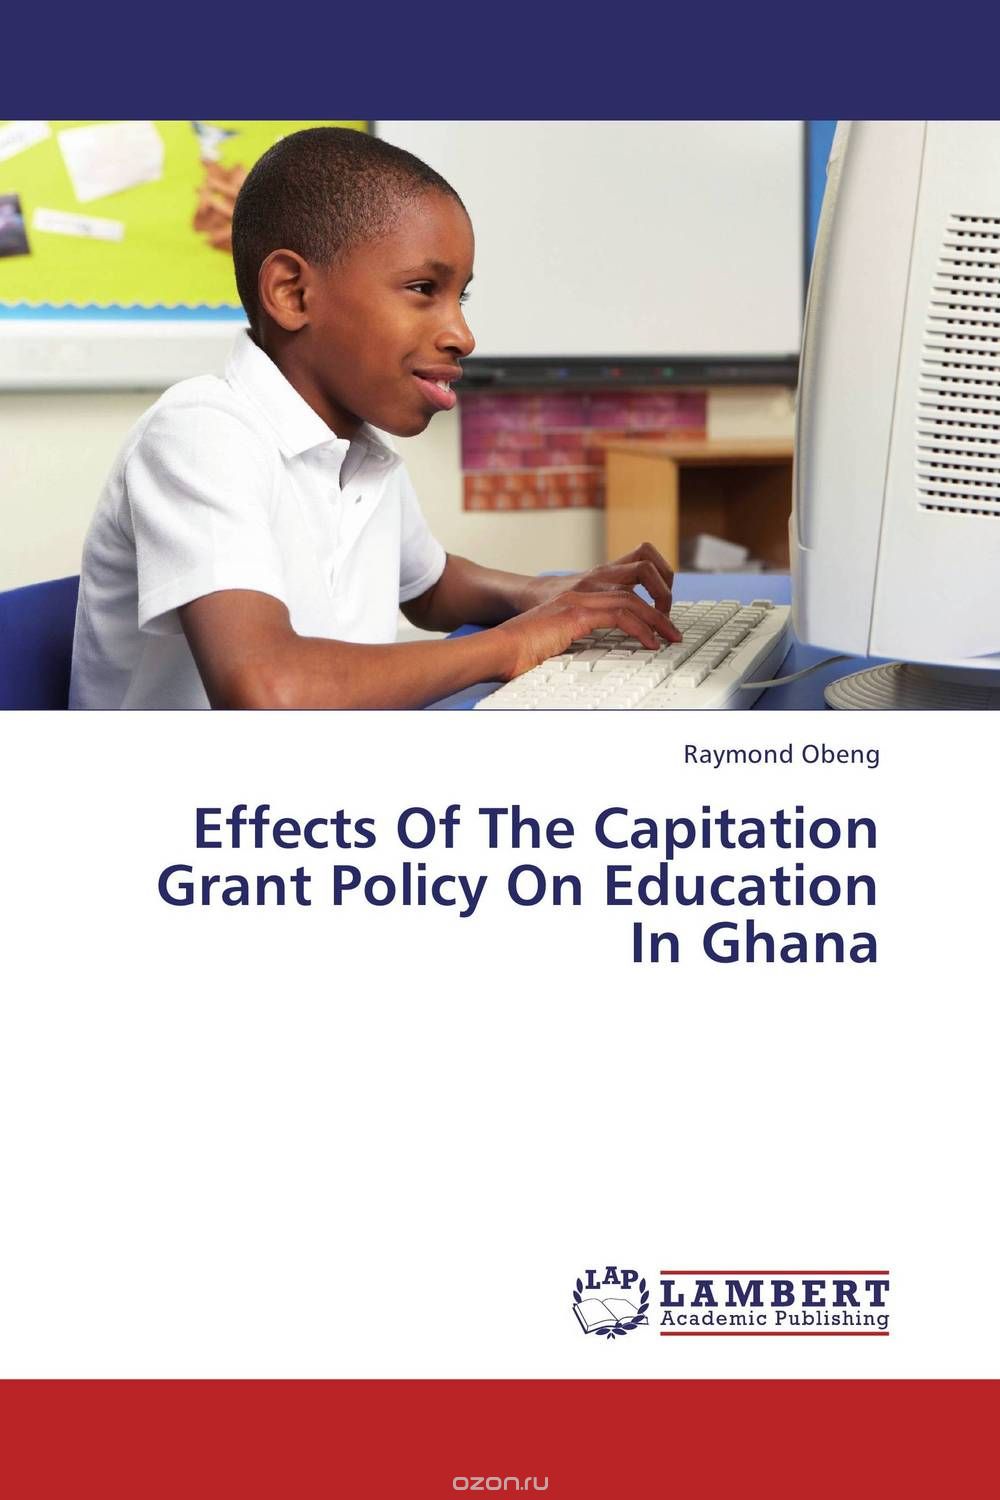 Effects Of The Capitation Grant Policy On Education In Ghana